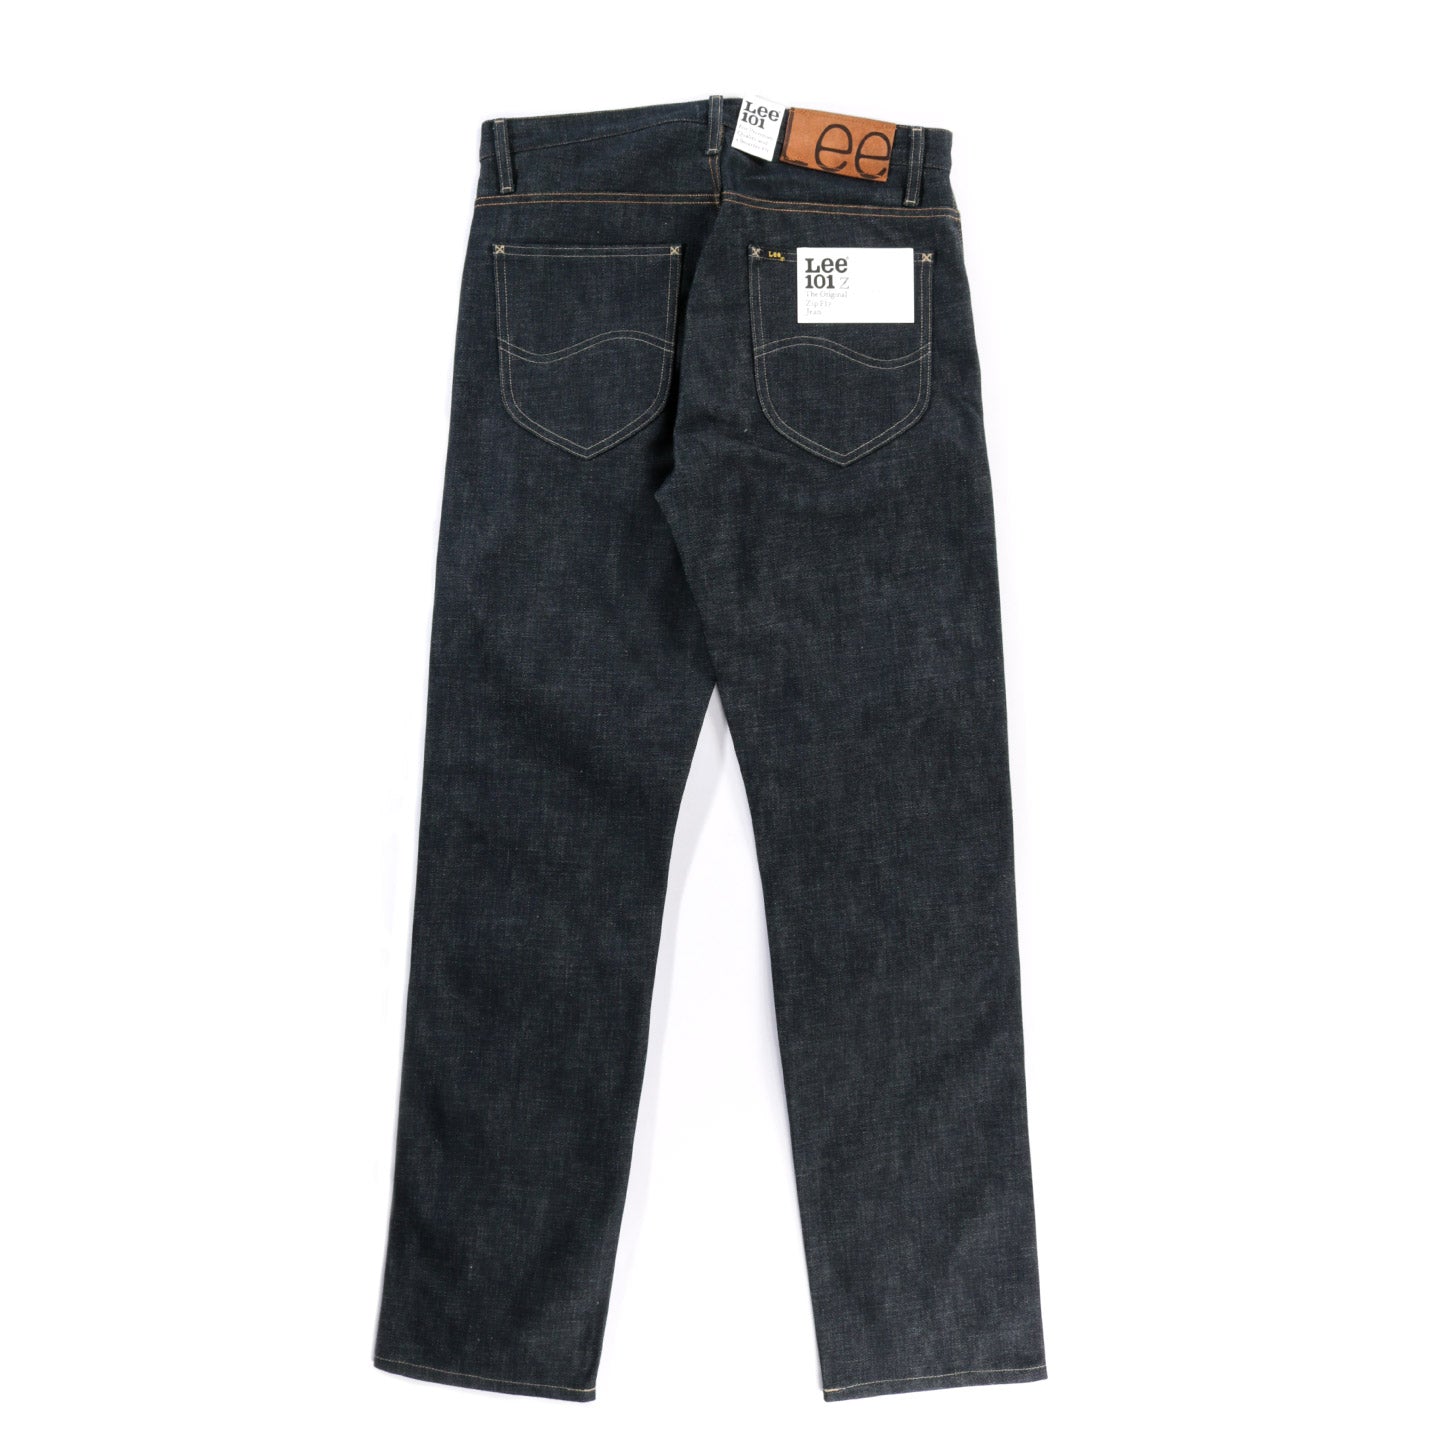 LEE 101Z GREEN CAST SELVAGE DRY